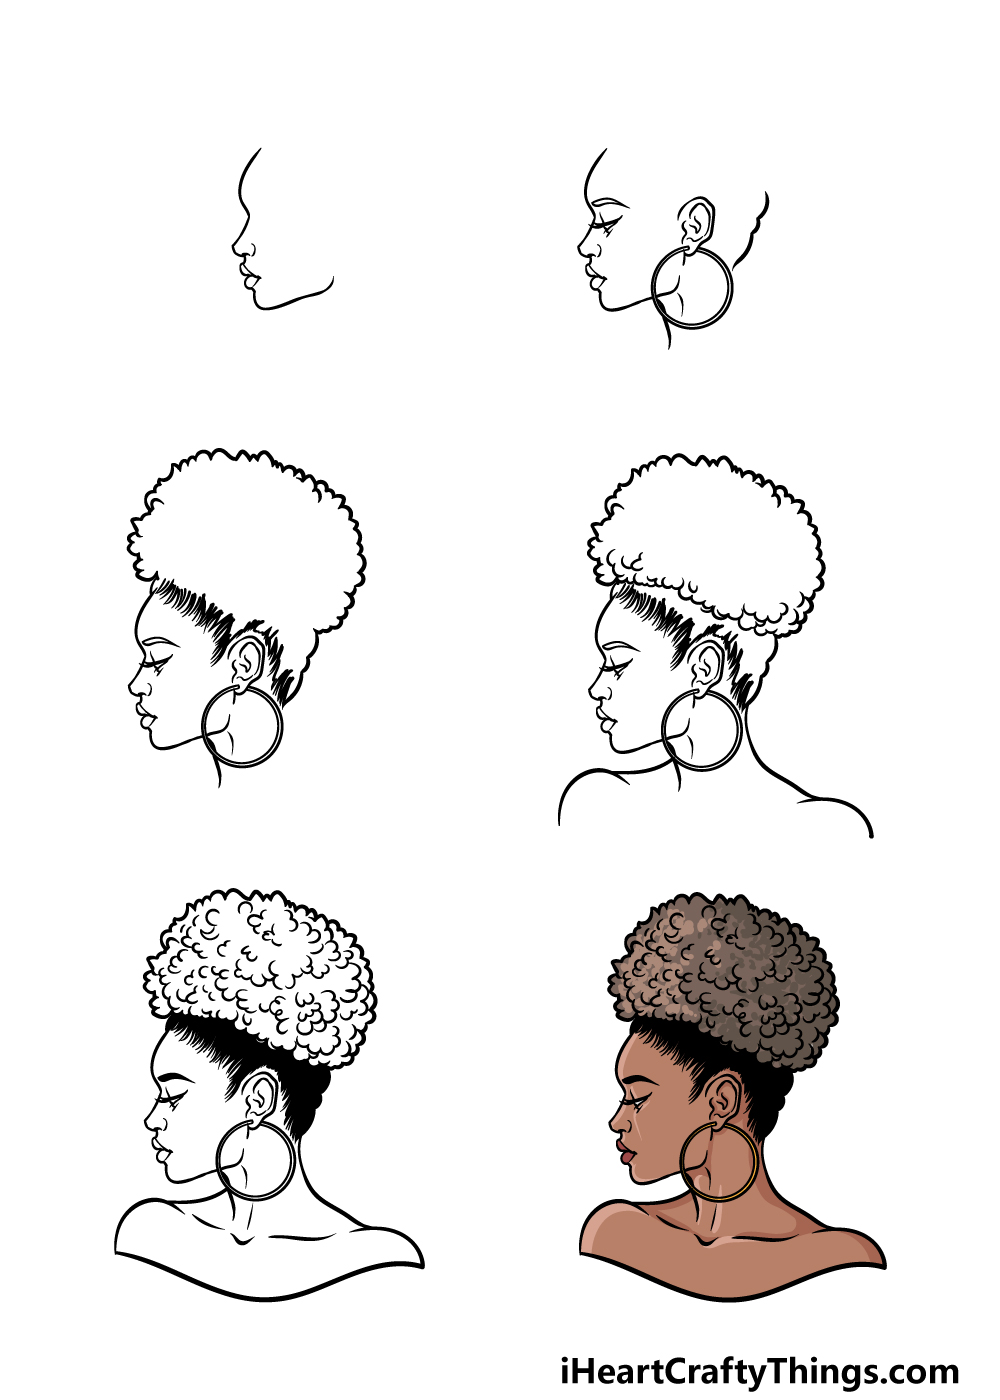 how to draw a Woman’s Side Profile in 6 steps